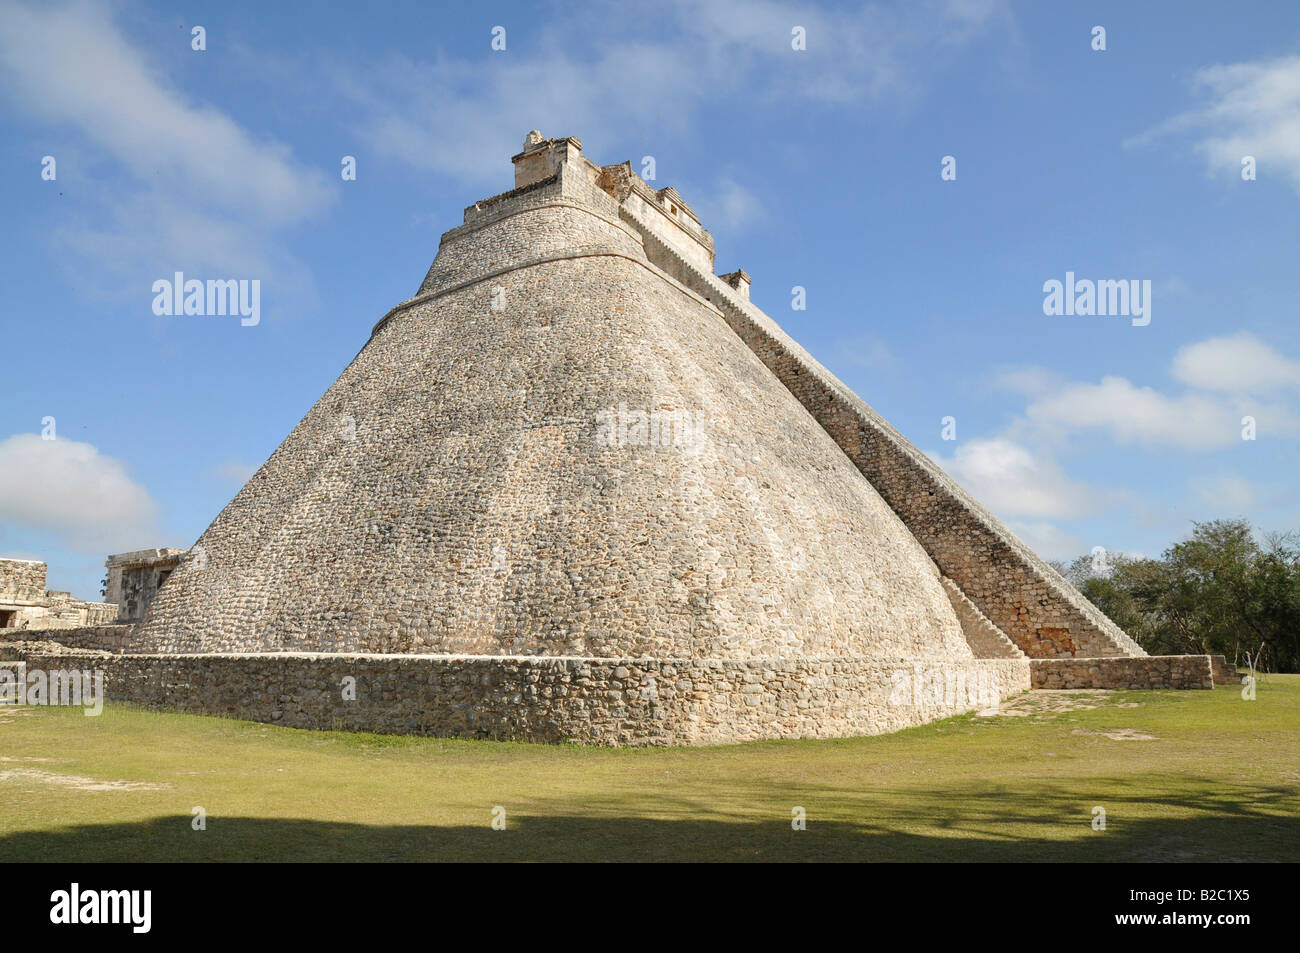 The Adivino or Pyramid of the Magician, Mayan excavation site, Uxmal, Yucatan, Mexico, Central America Stock Photo